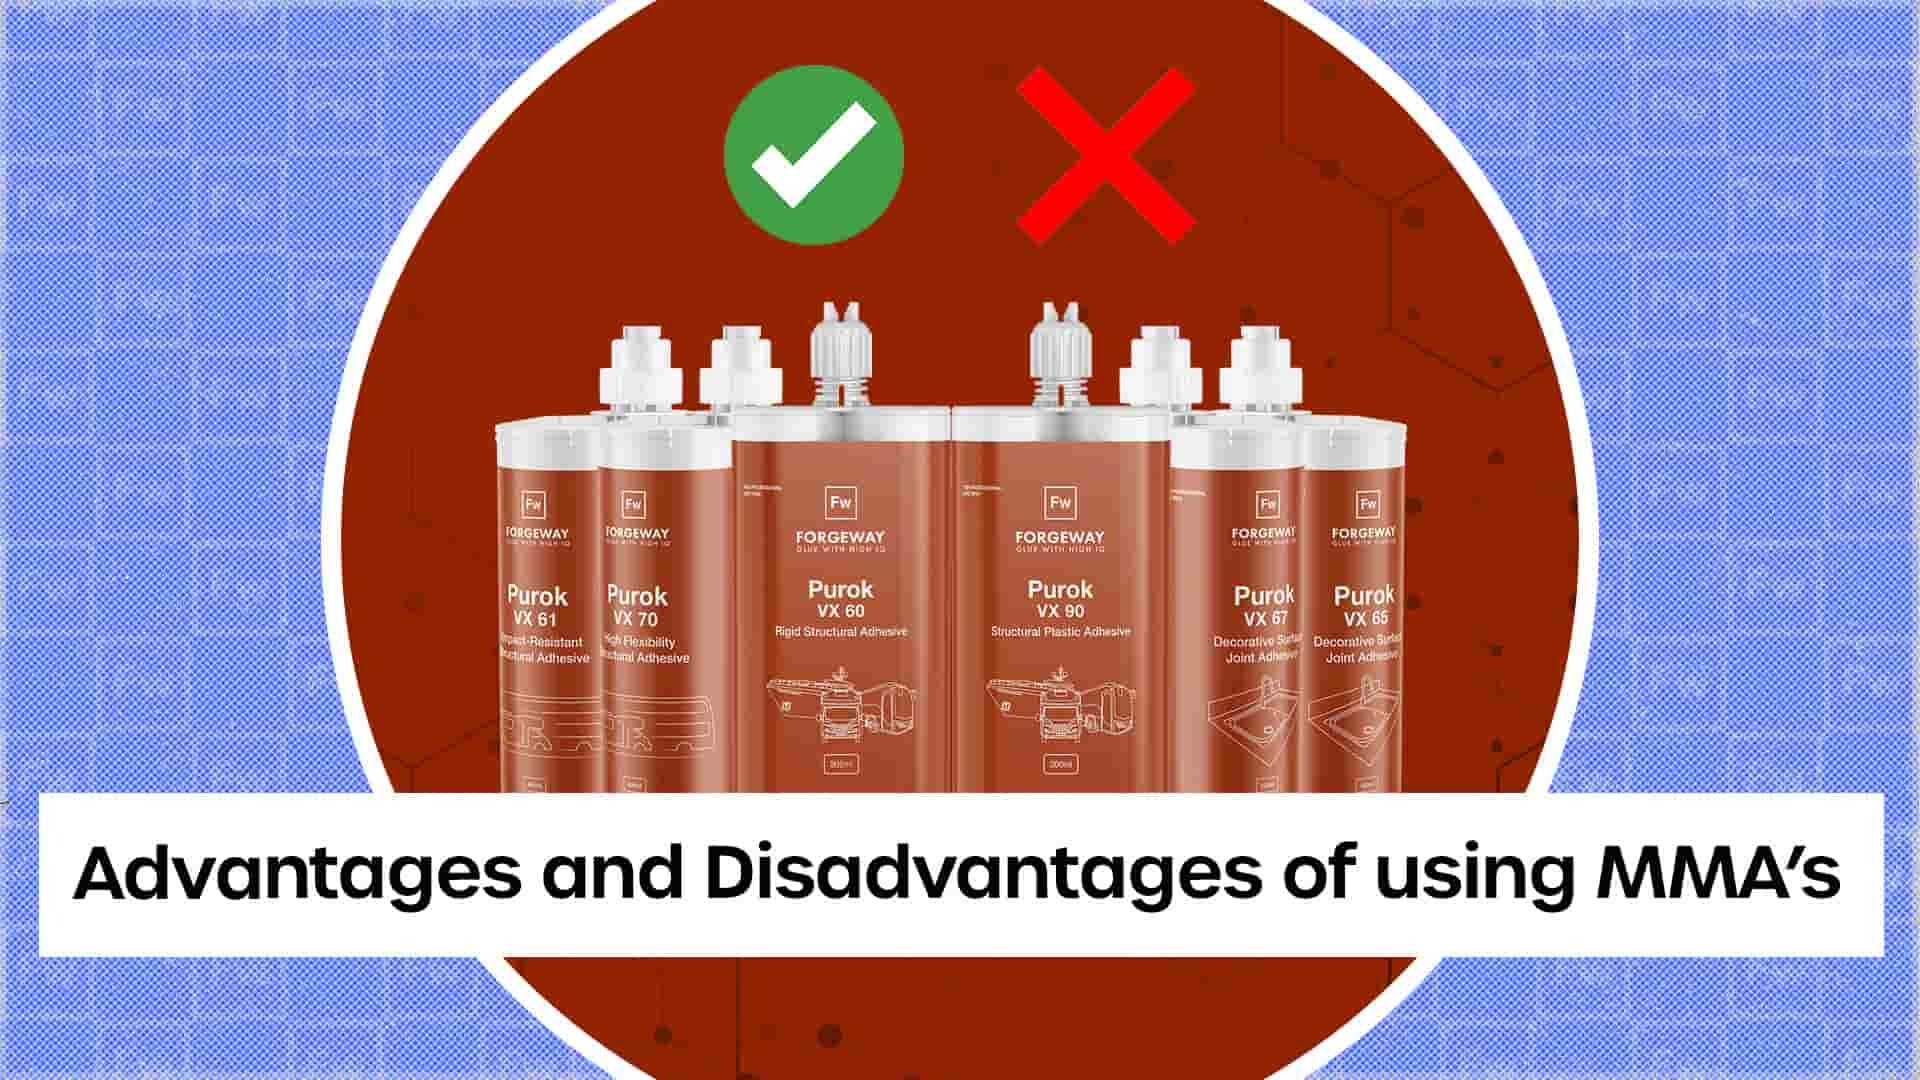 Advantages and disadvantages of using methyl methacrylate adhesives